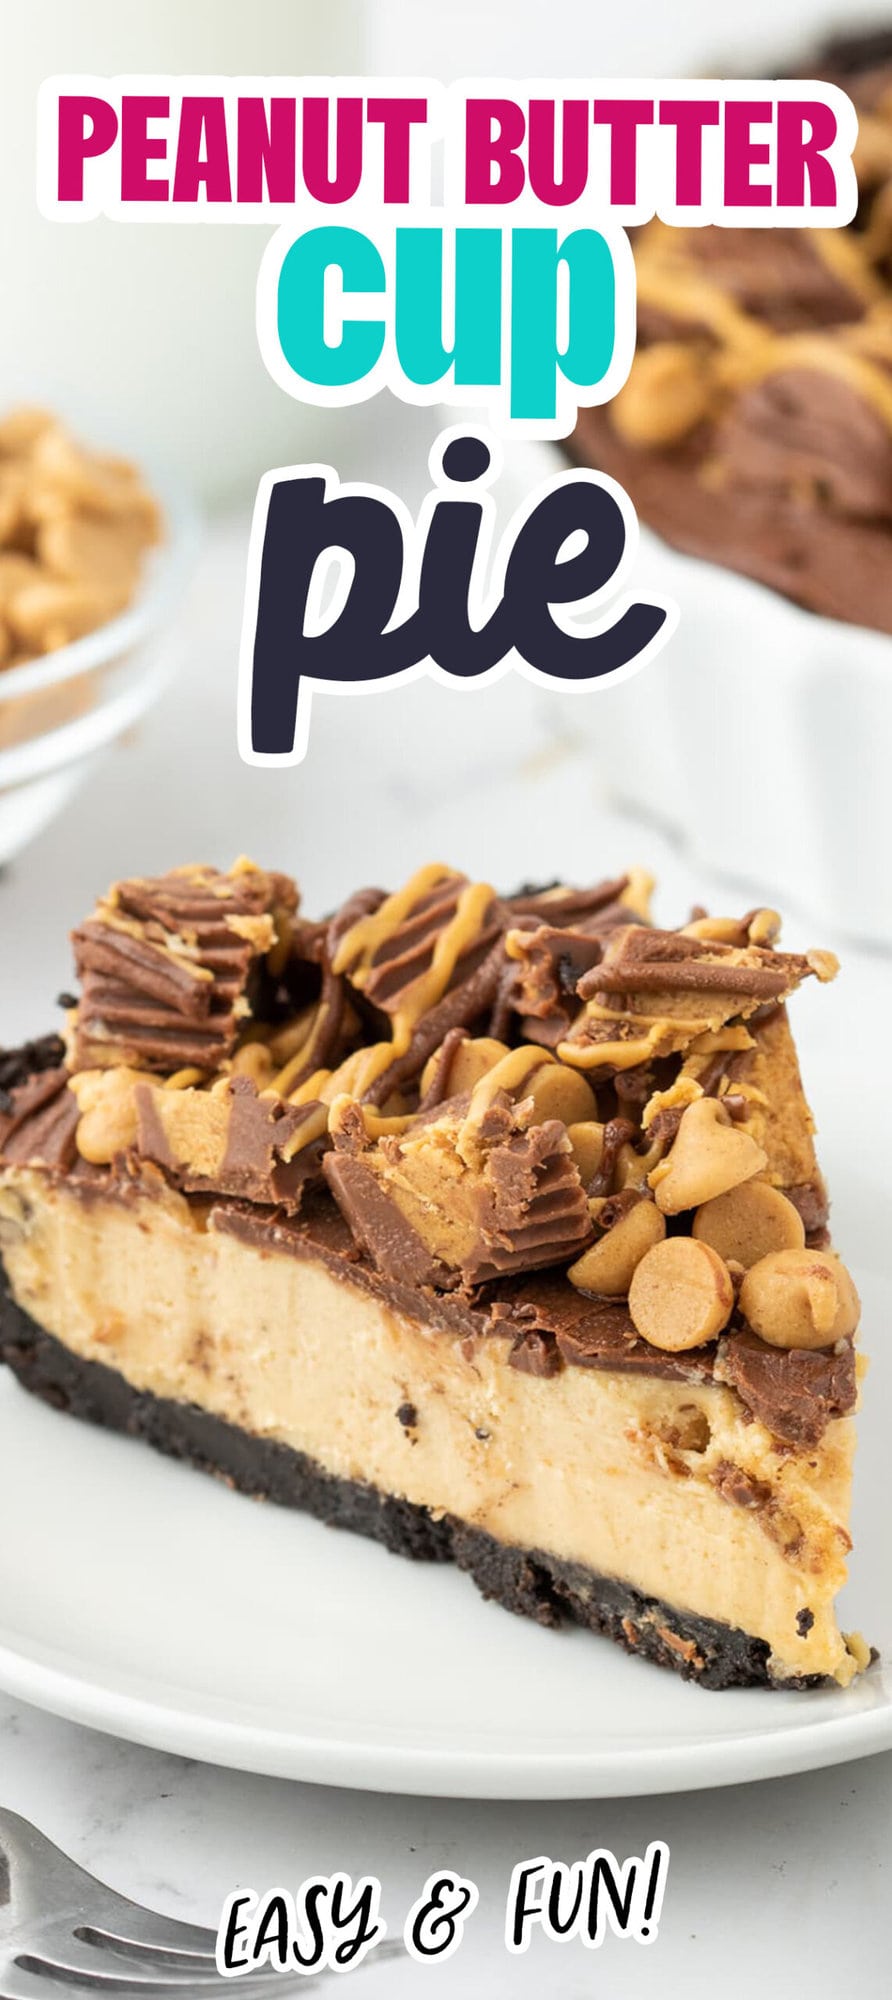 a pie with chocolate crust, creamy filling, and chocolate on it with peanut butter cups